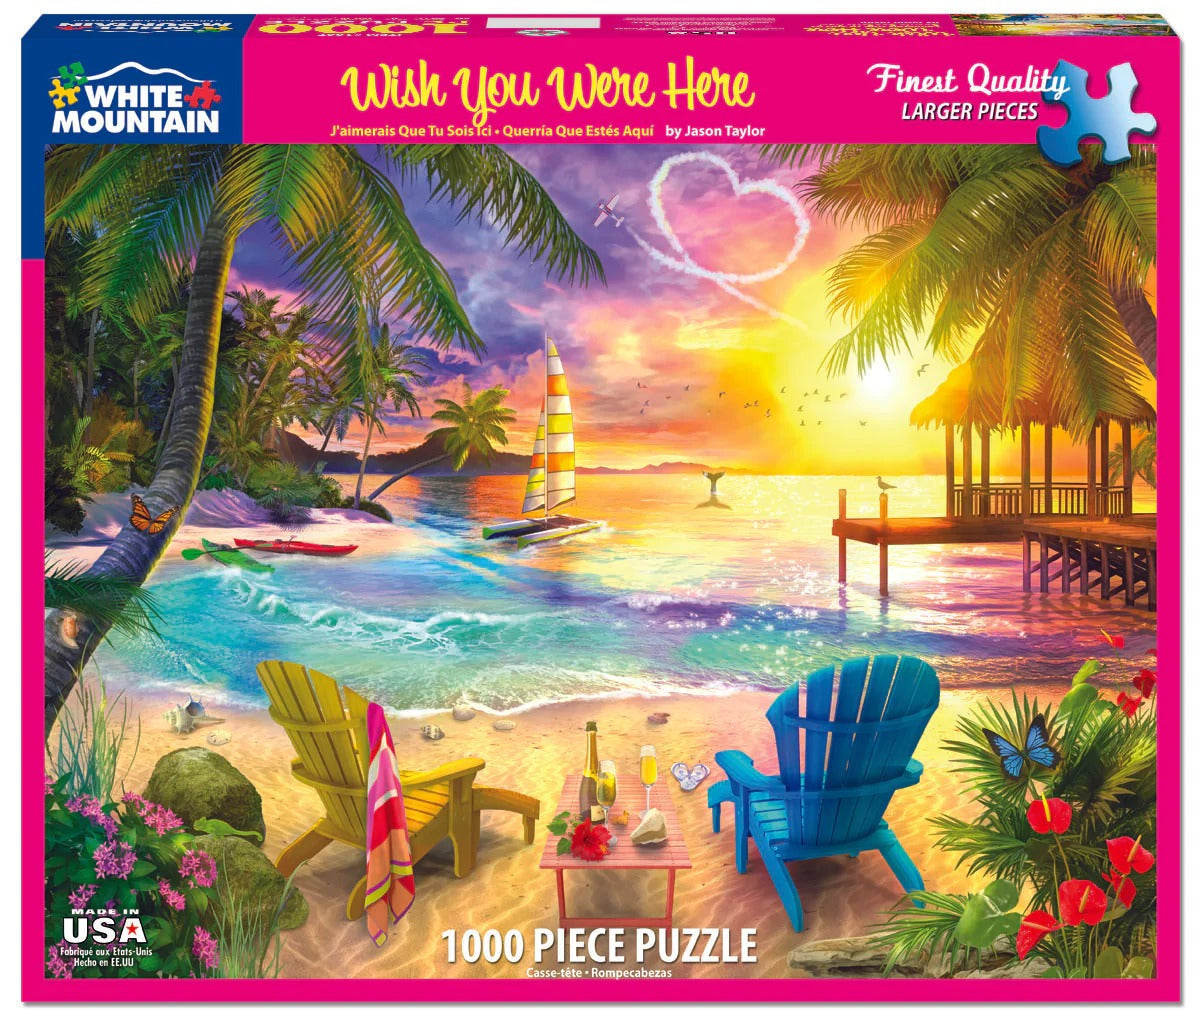 Wish You Were Here 1000 Piece Puzzle 